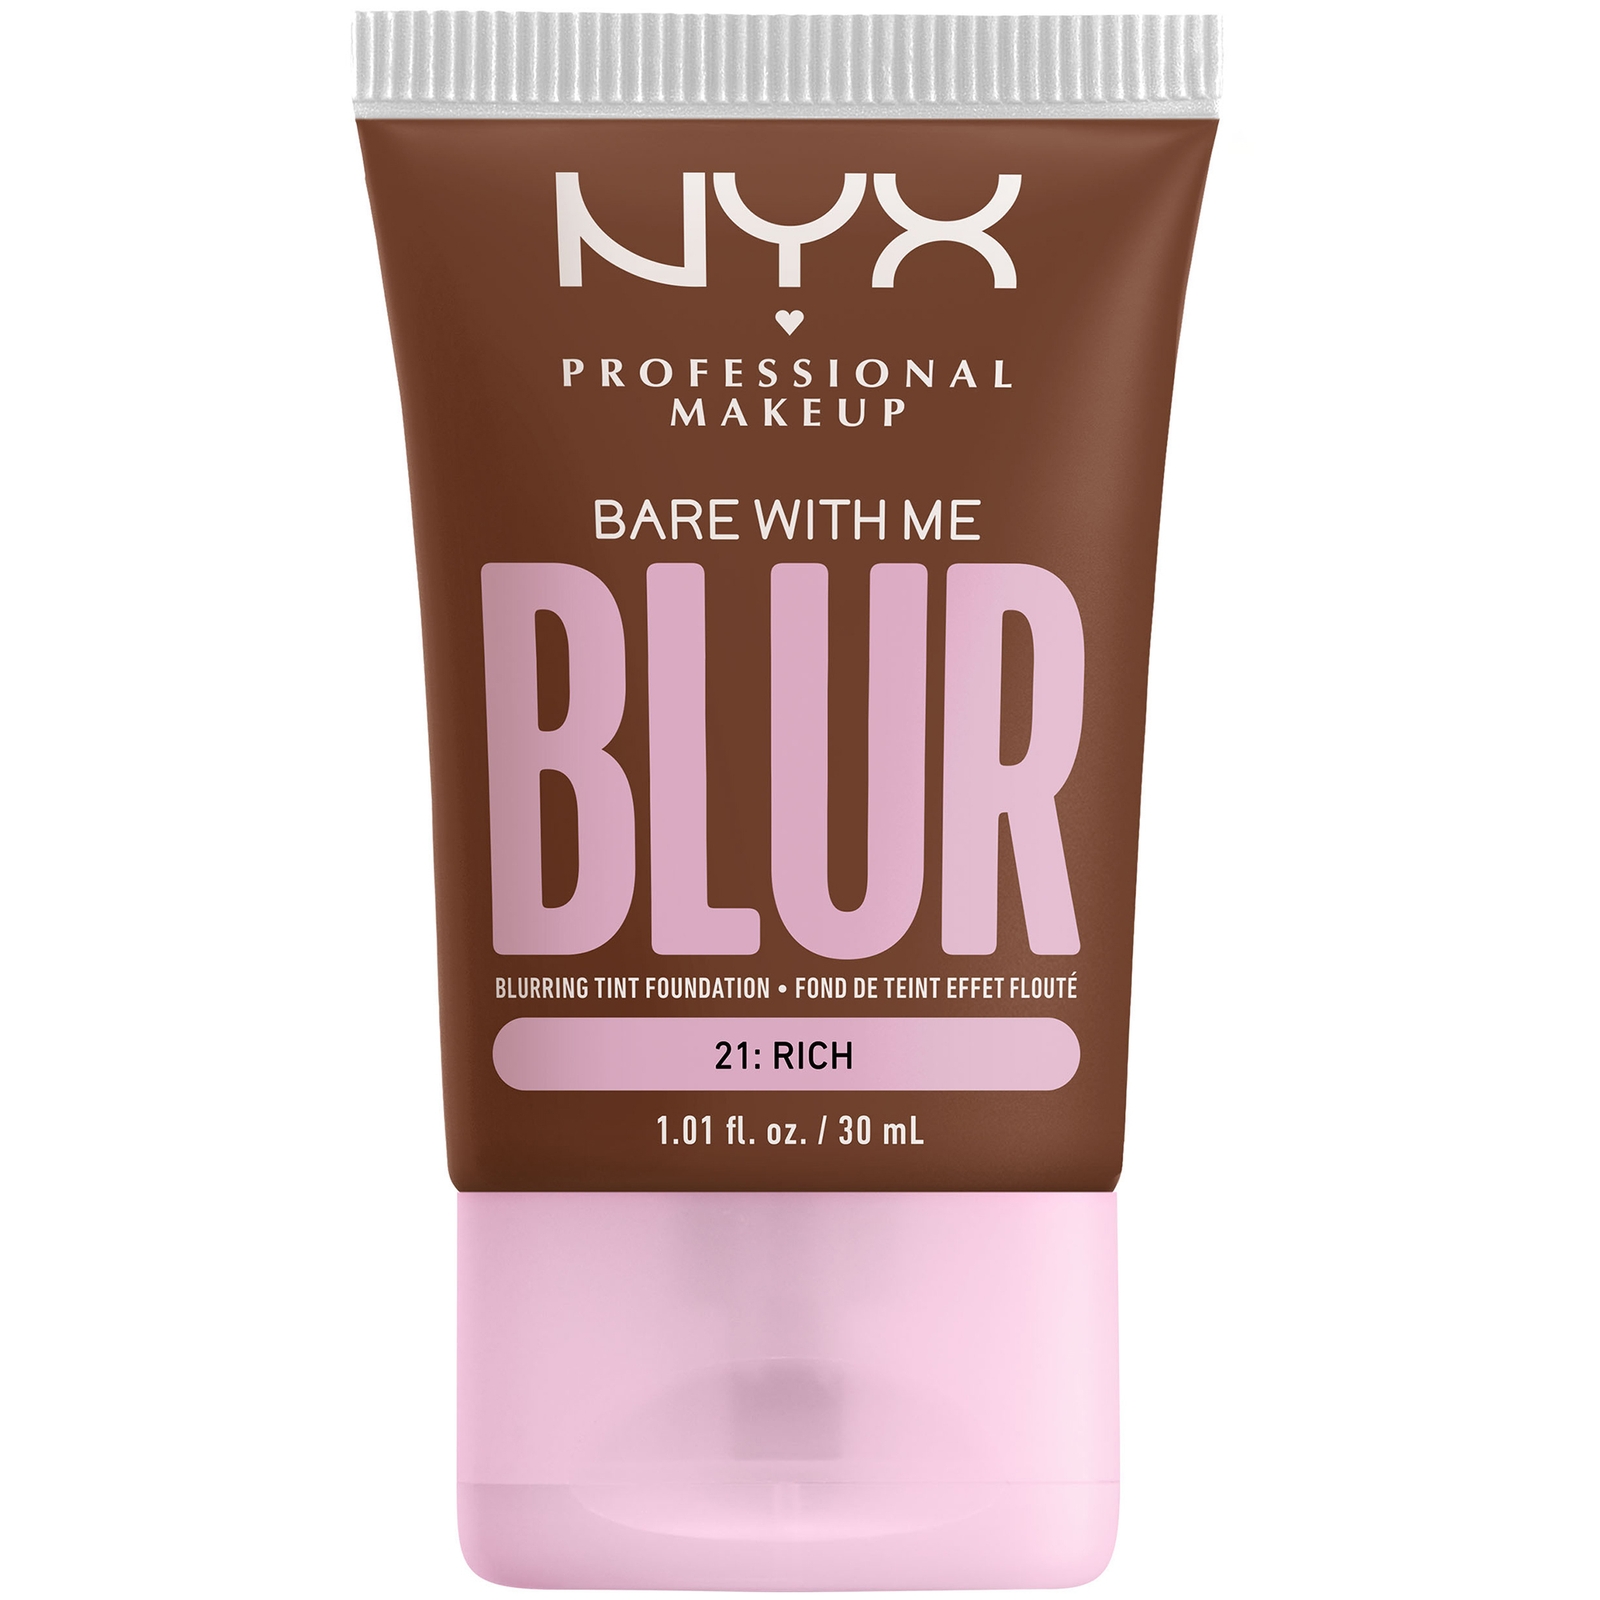 Nyx Professional Makeup Bare With Me Blur Tint Foundation 30ml (varios Shades) - Rich In White